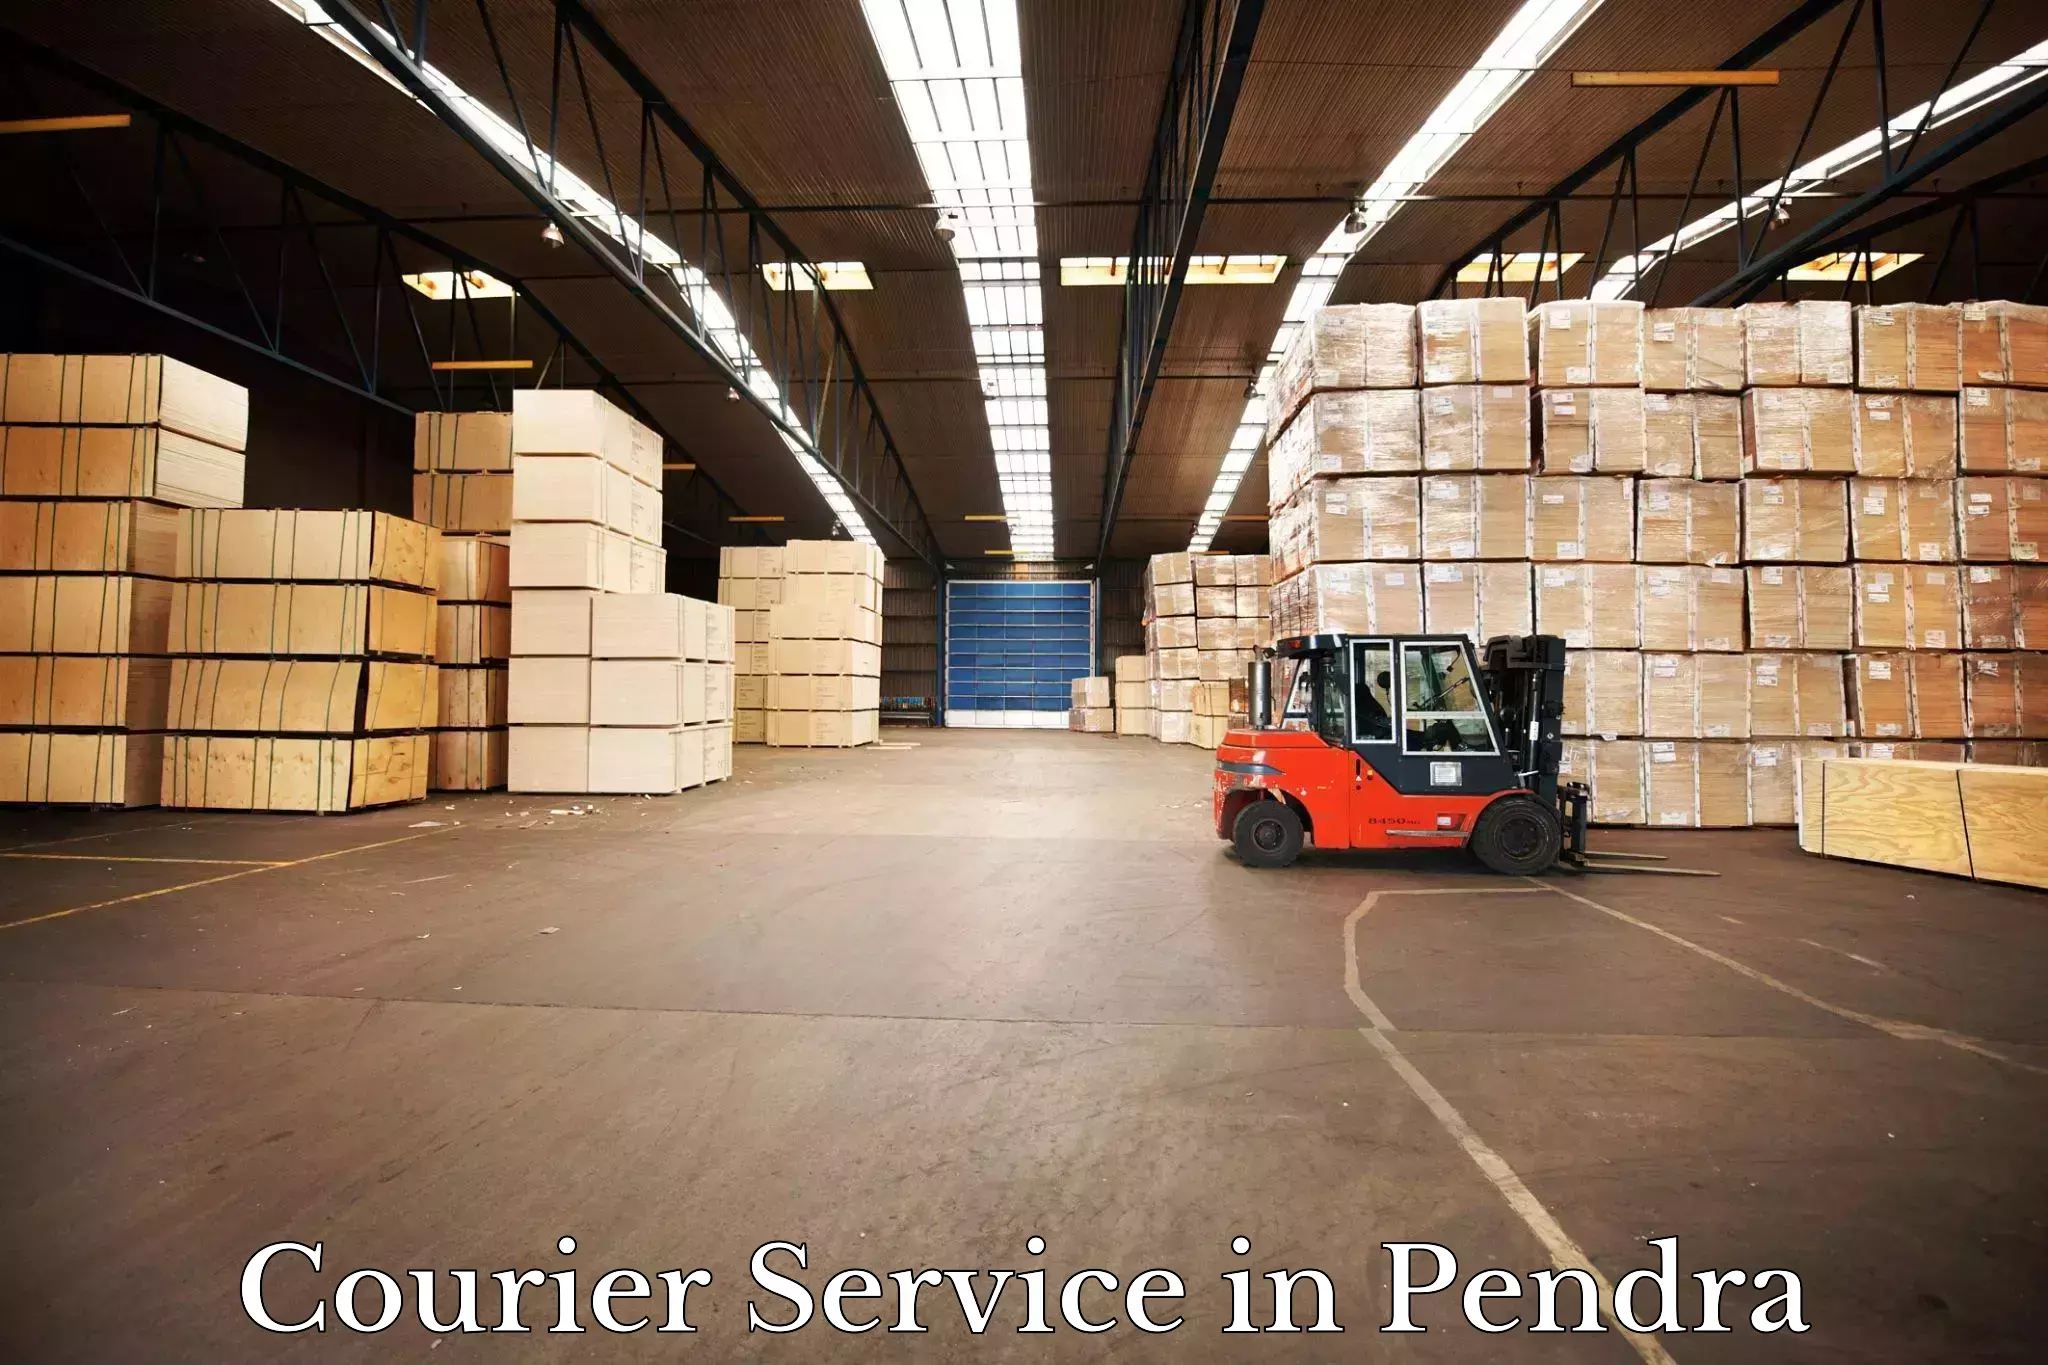 Comprehensive parcel tracking in Pendra